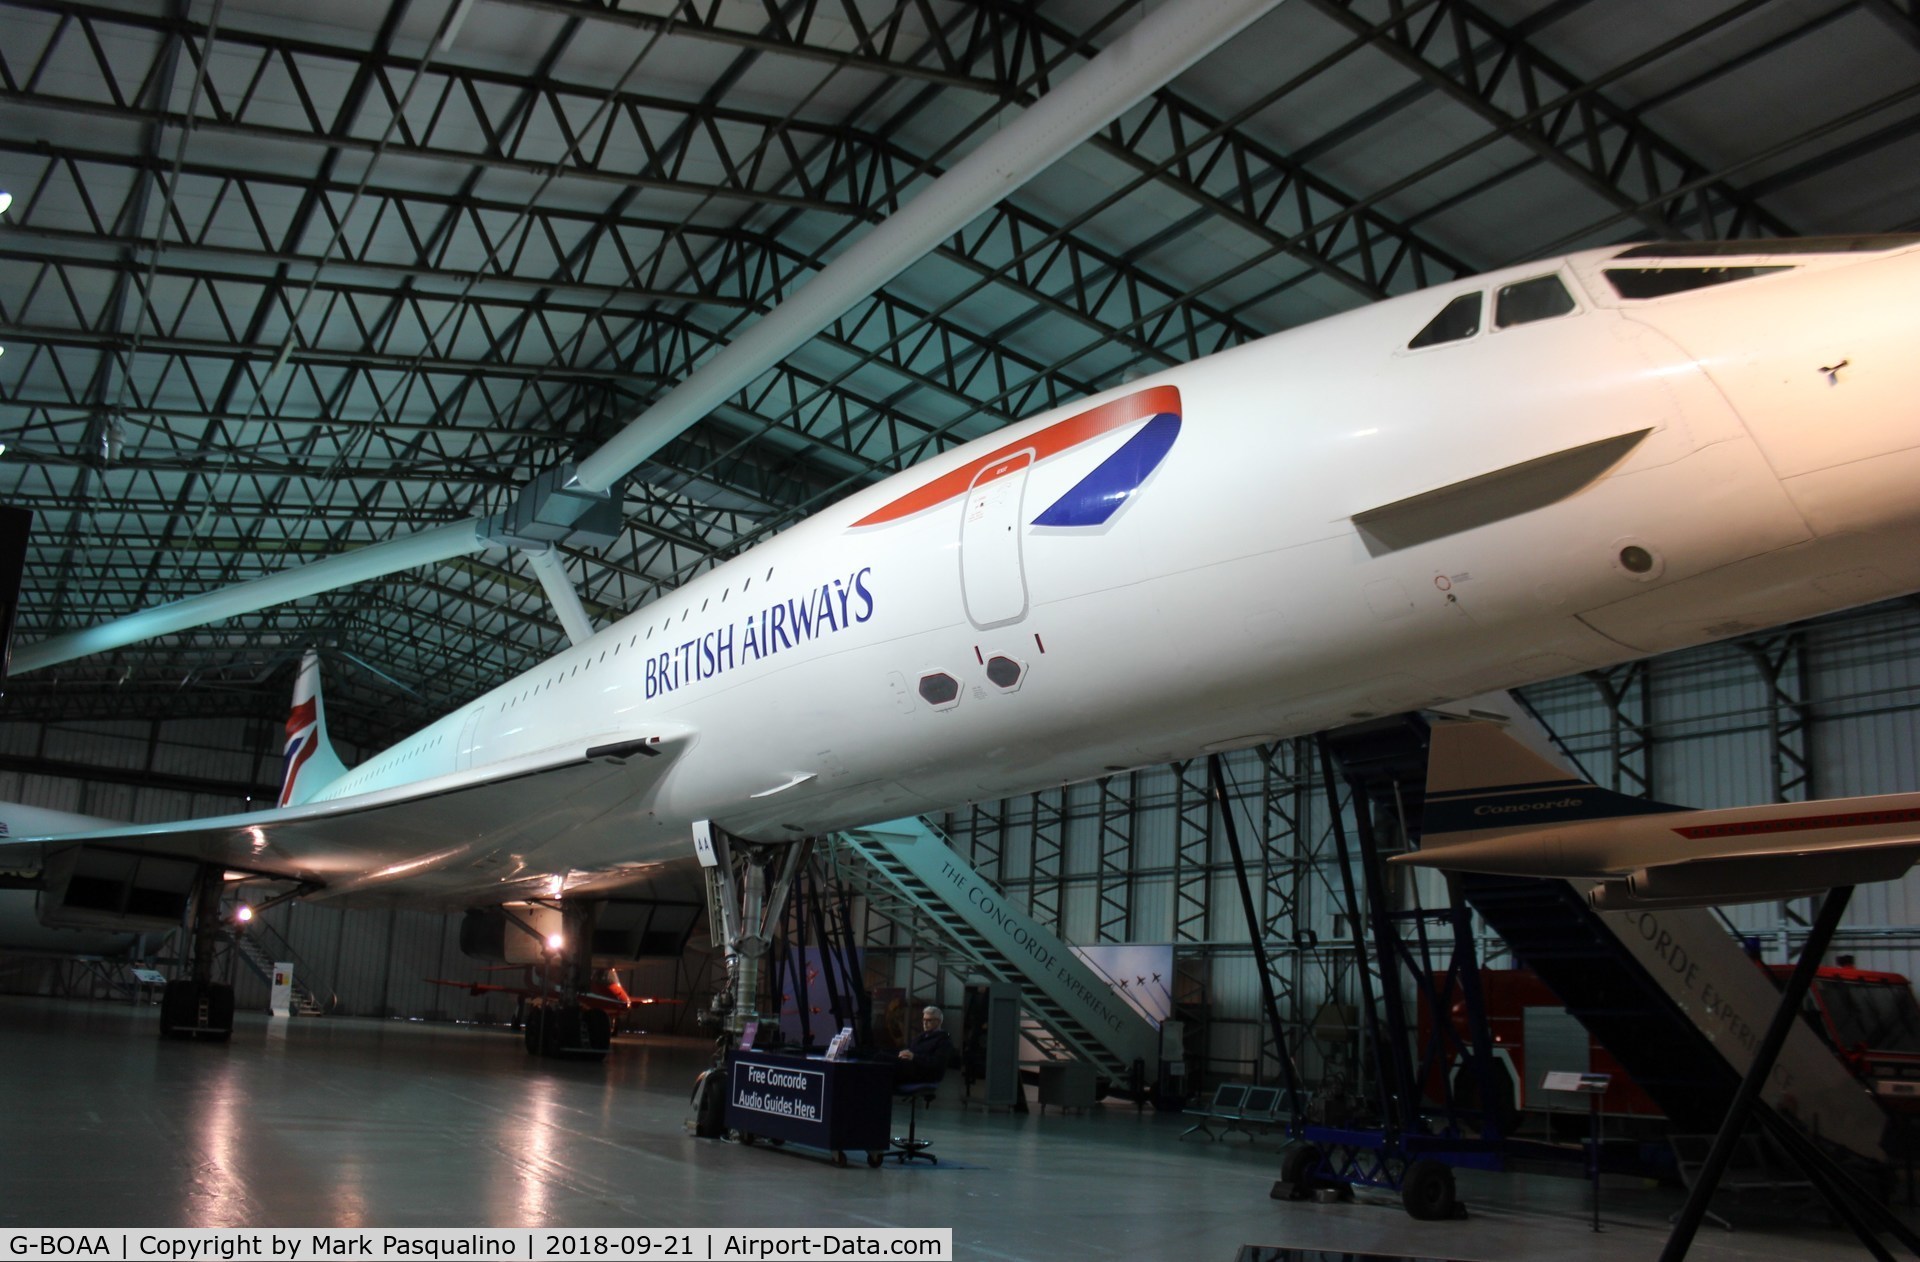 G-BOAA, 1974 Aerospatiale-BAC Concorde 1-102 C/N 100-006, Concorde 1-102 at the National Museum of Flight East Fortune Scotland